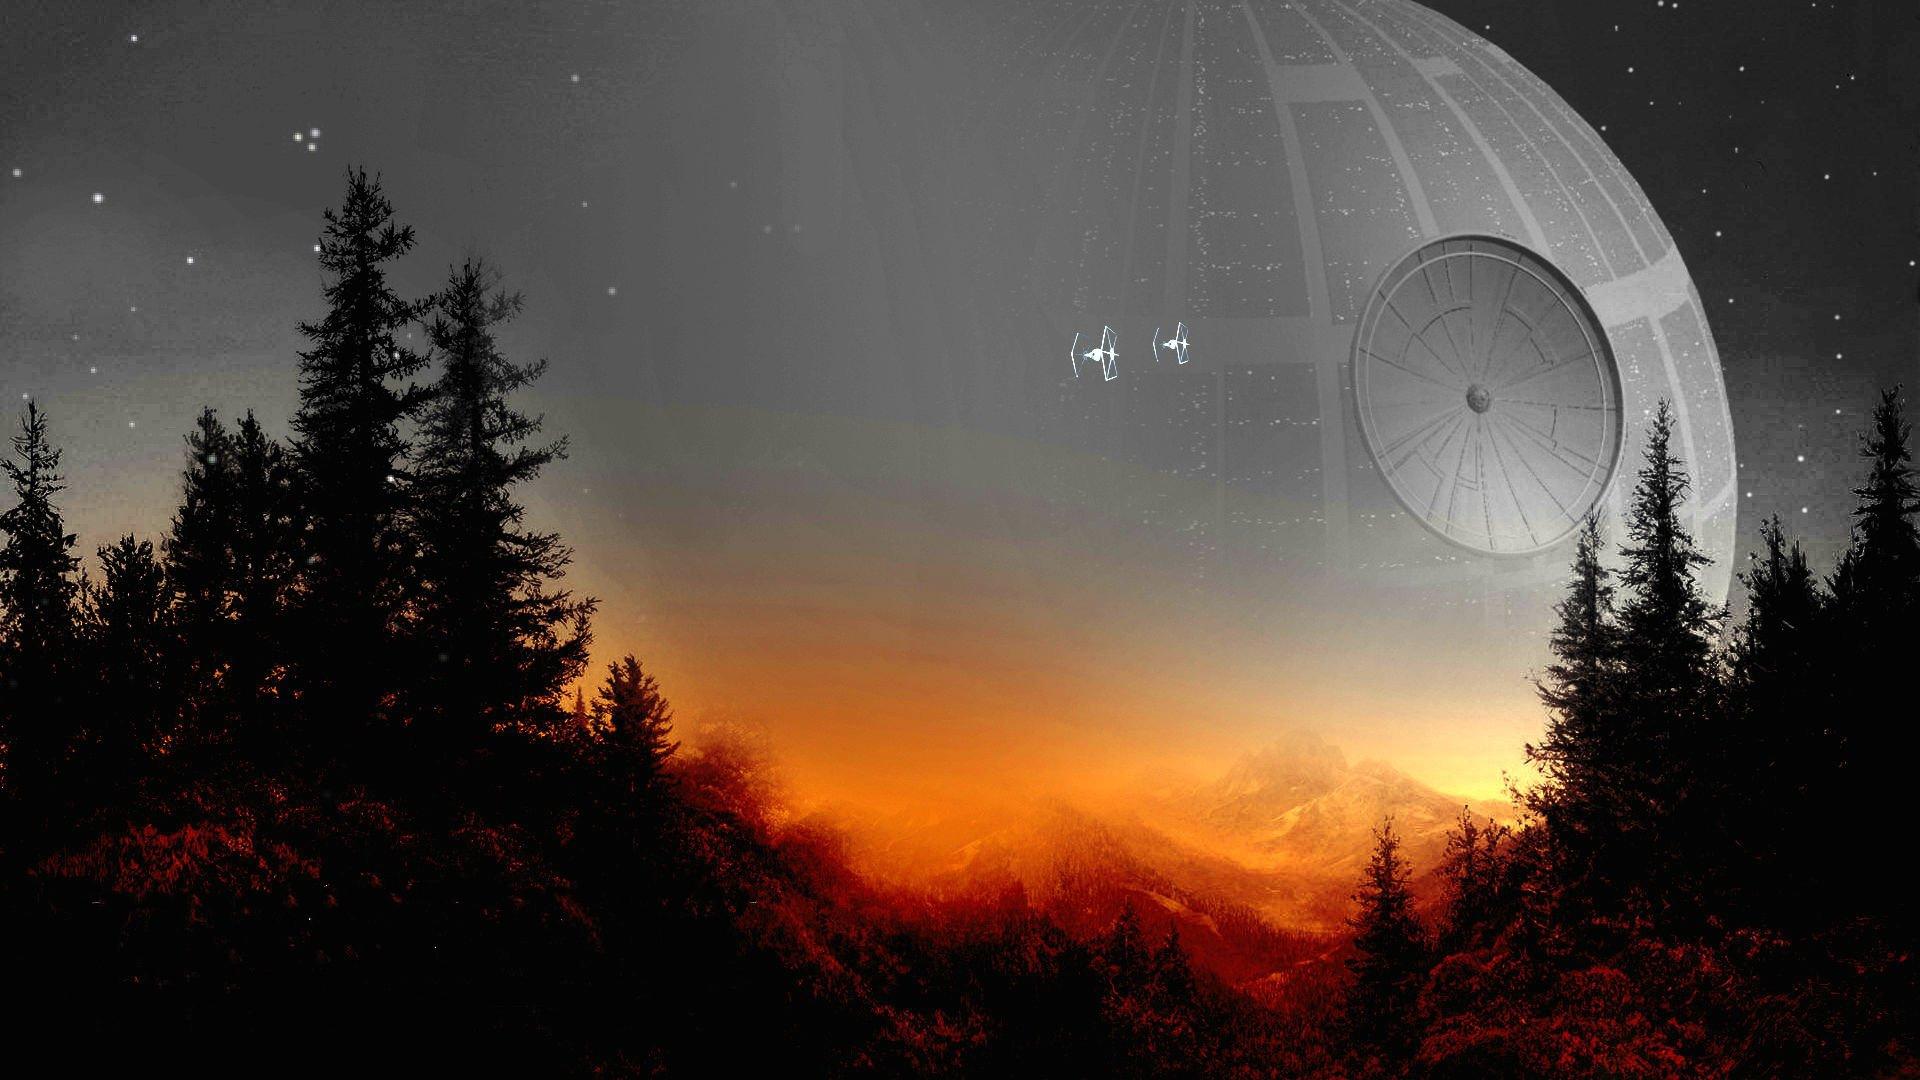 Star Wars City Wallpapers - Top Free Star Wars City Backgrounds